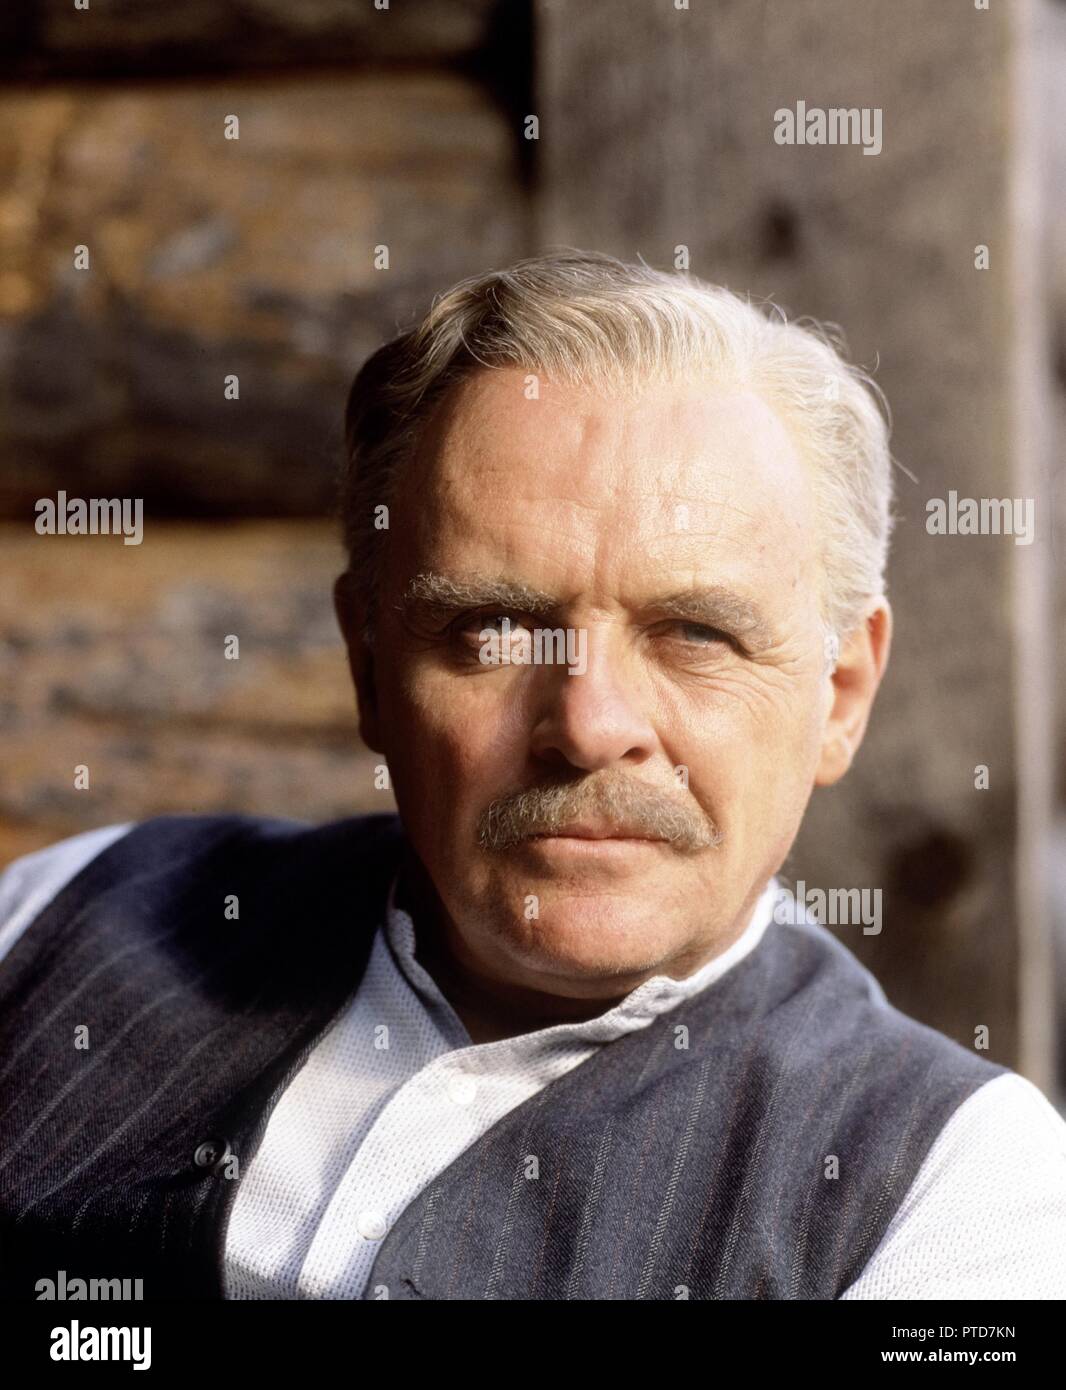 Original film title: LEGENDS OF THE FALL. English title: LEGENDS OF THE FALL. Year: 1994. Director: EDWARD ZWICK. Stars: ANTHONY HOPKINS. Credit: TRISTAR PICTURES / Album Stock Photo